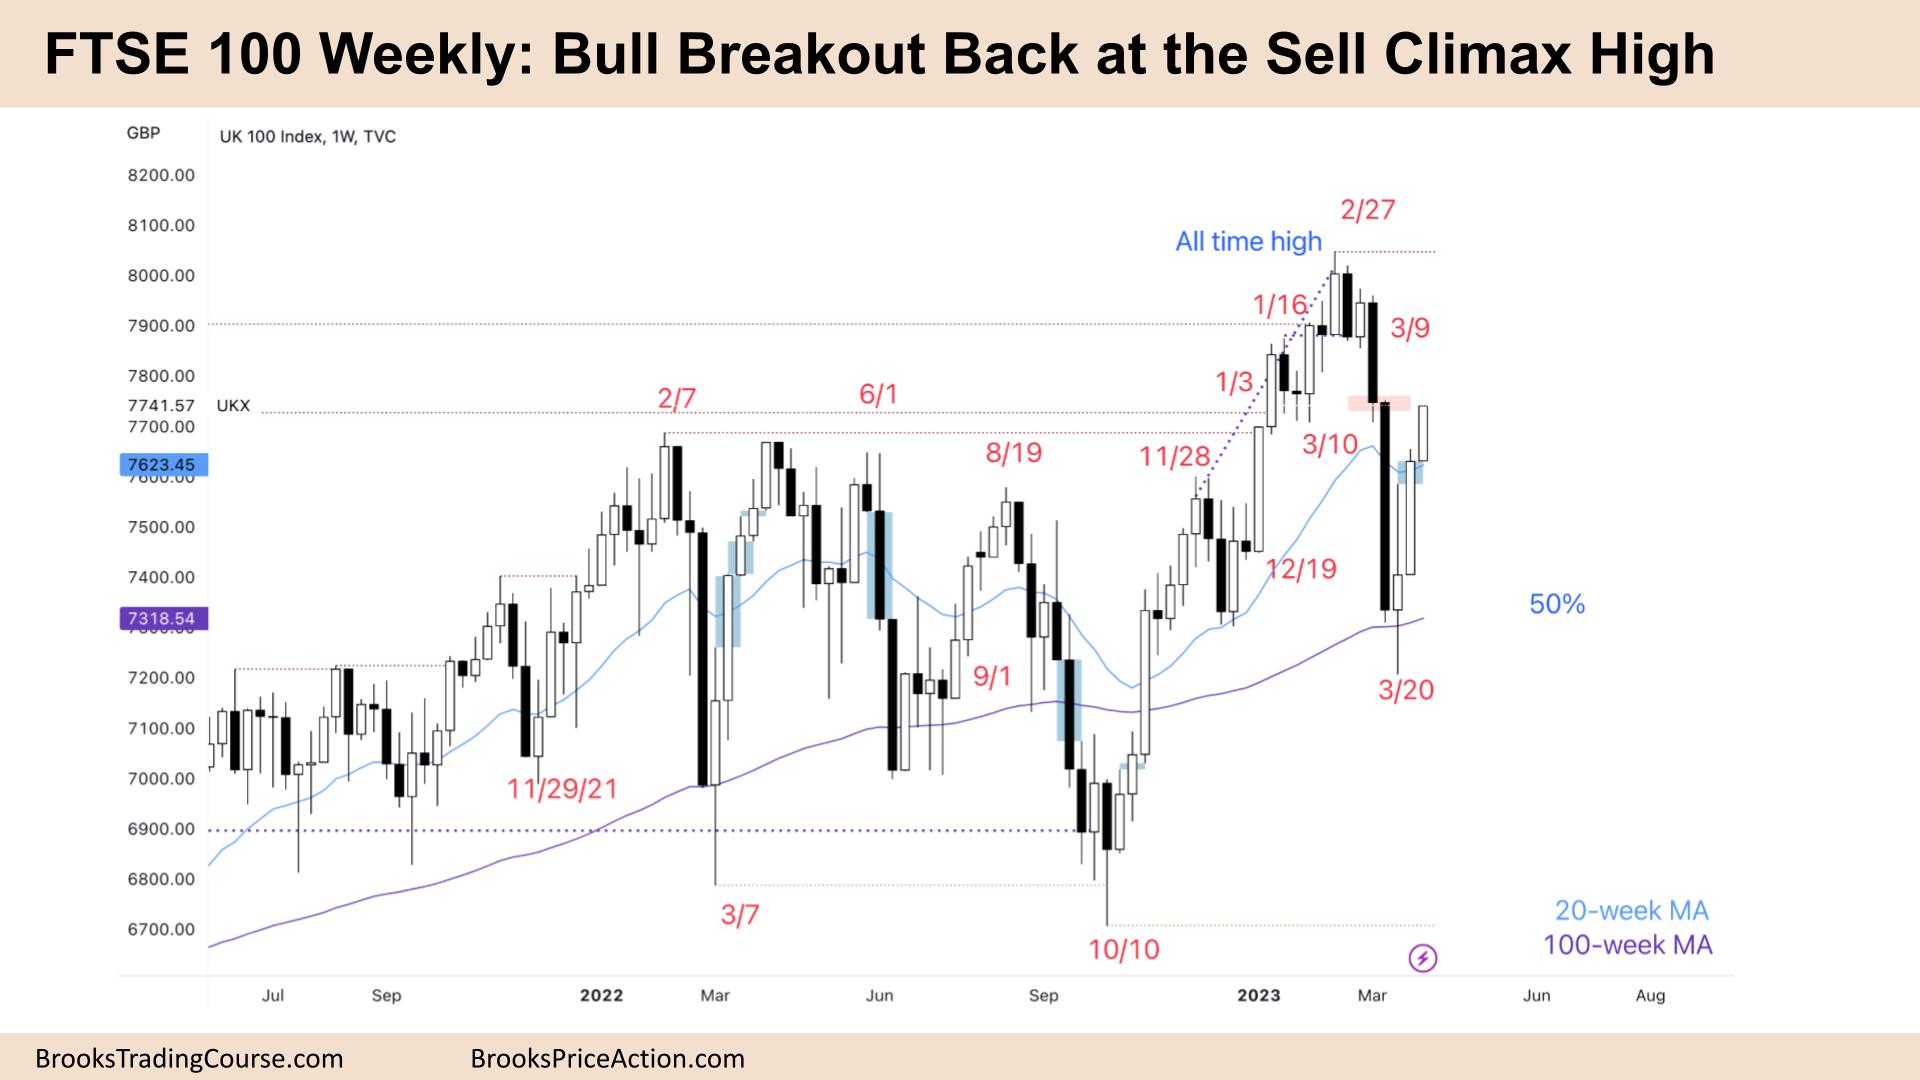 FTSE 100 Big Bull Breakout to Sell Climax High